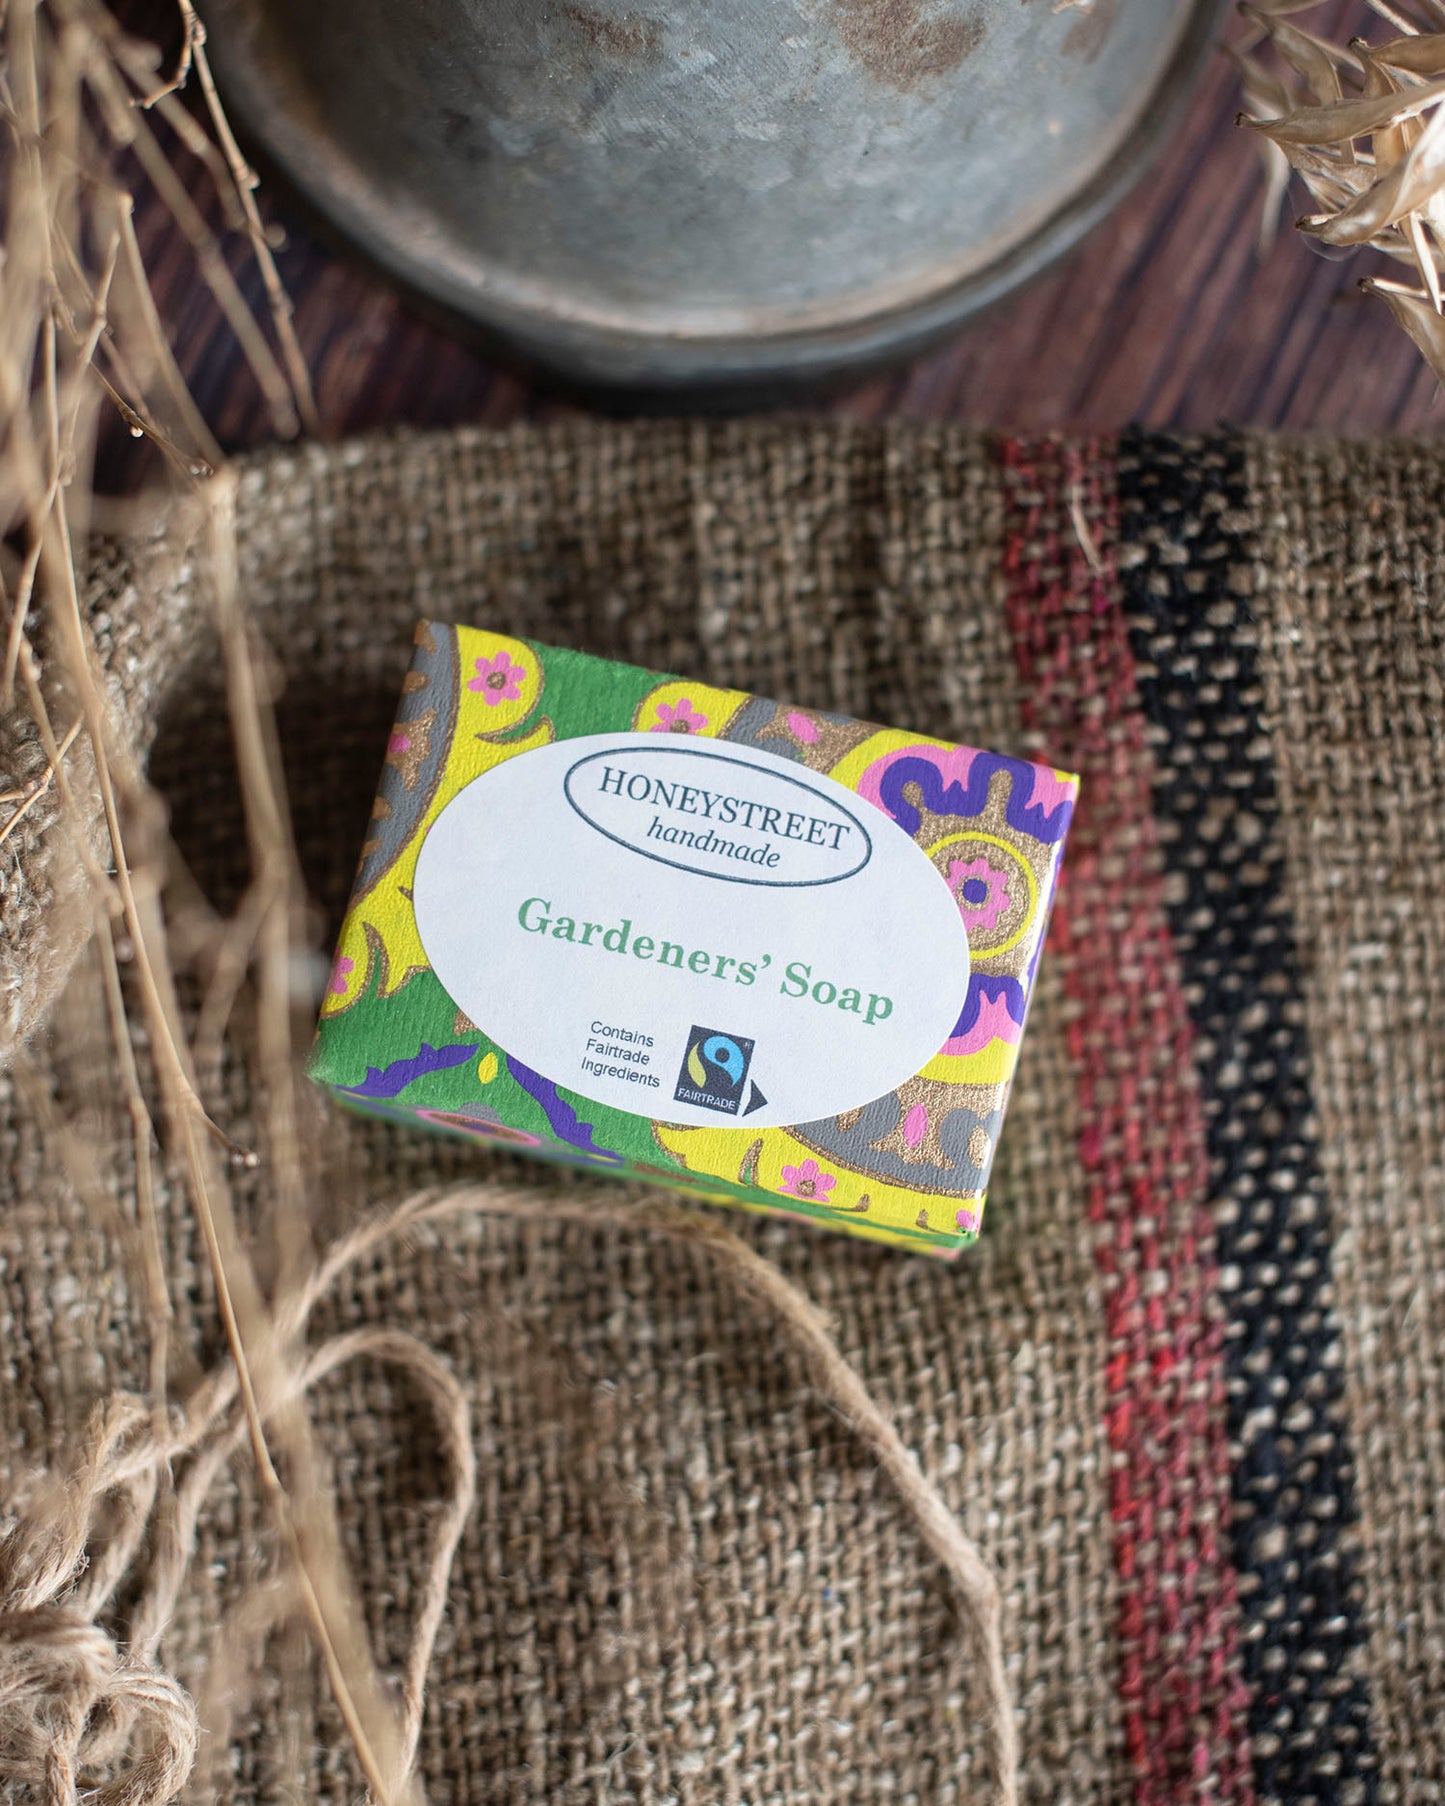 Gardeners’ Soap - The india Shop